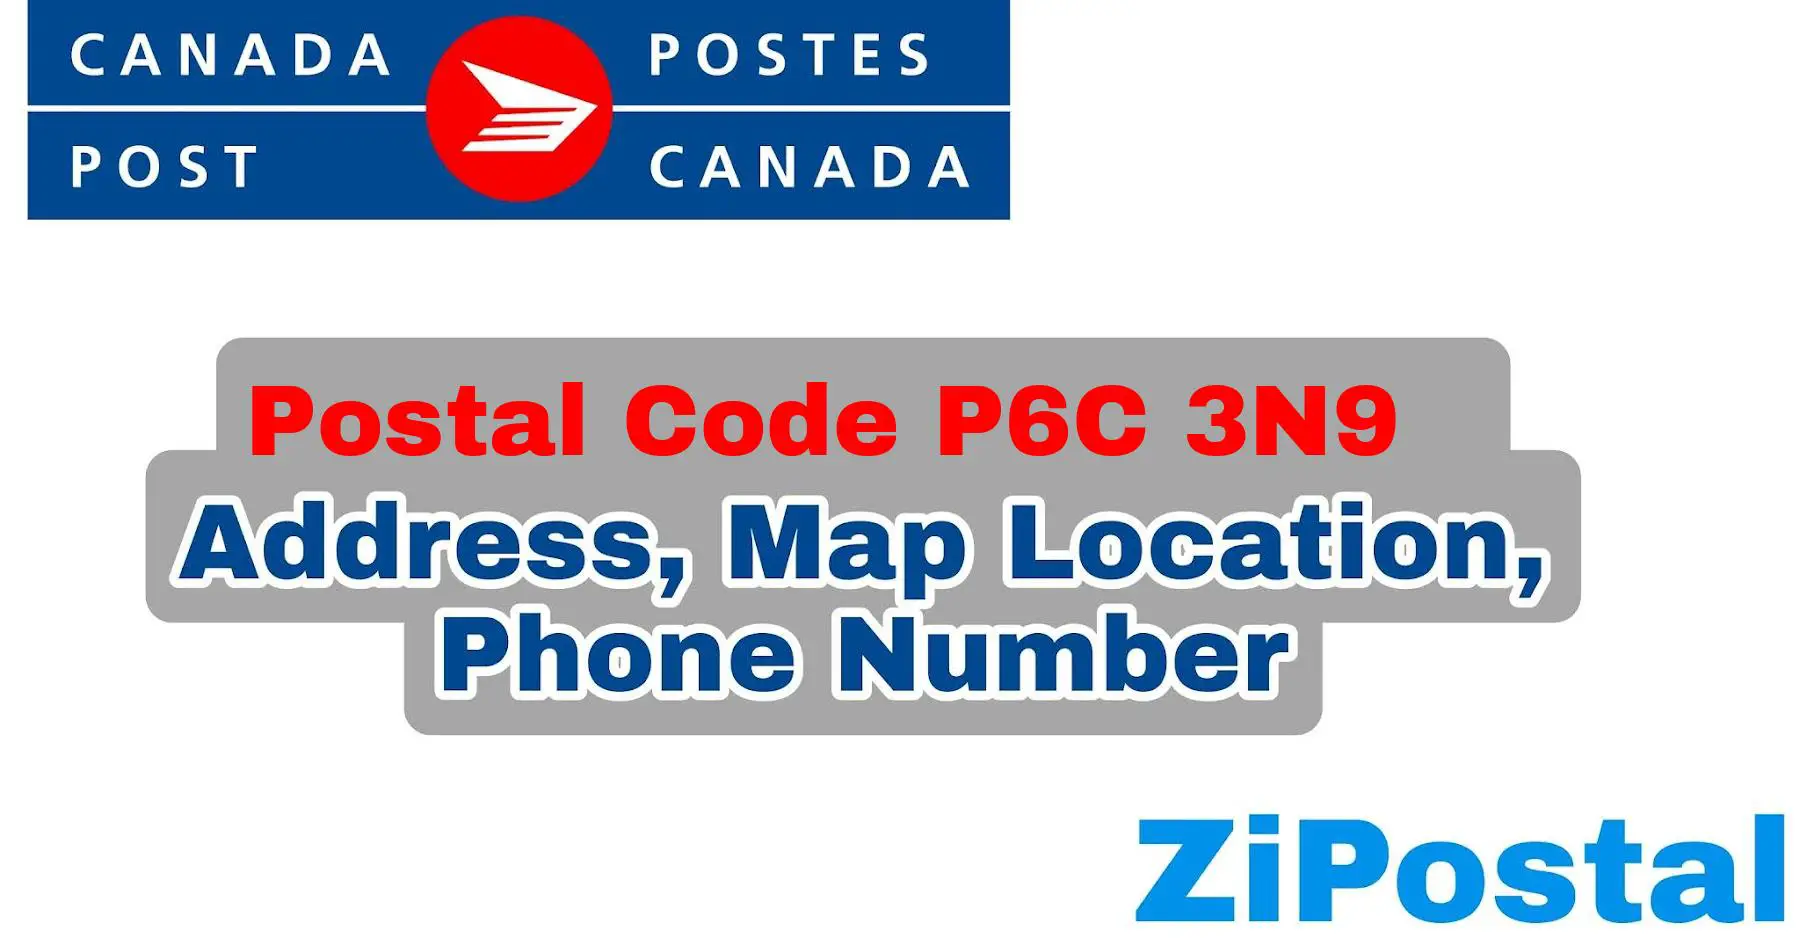 Postal Code P6C 3N9 Address Map Location and Phone Number